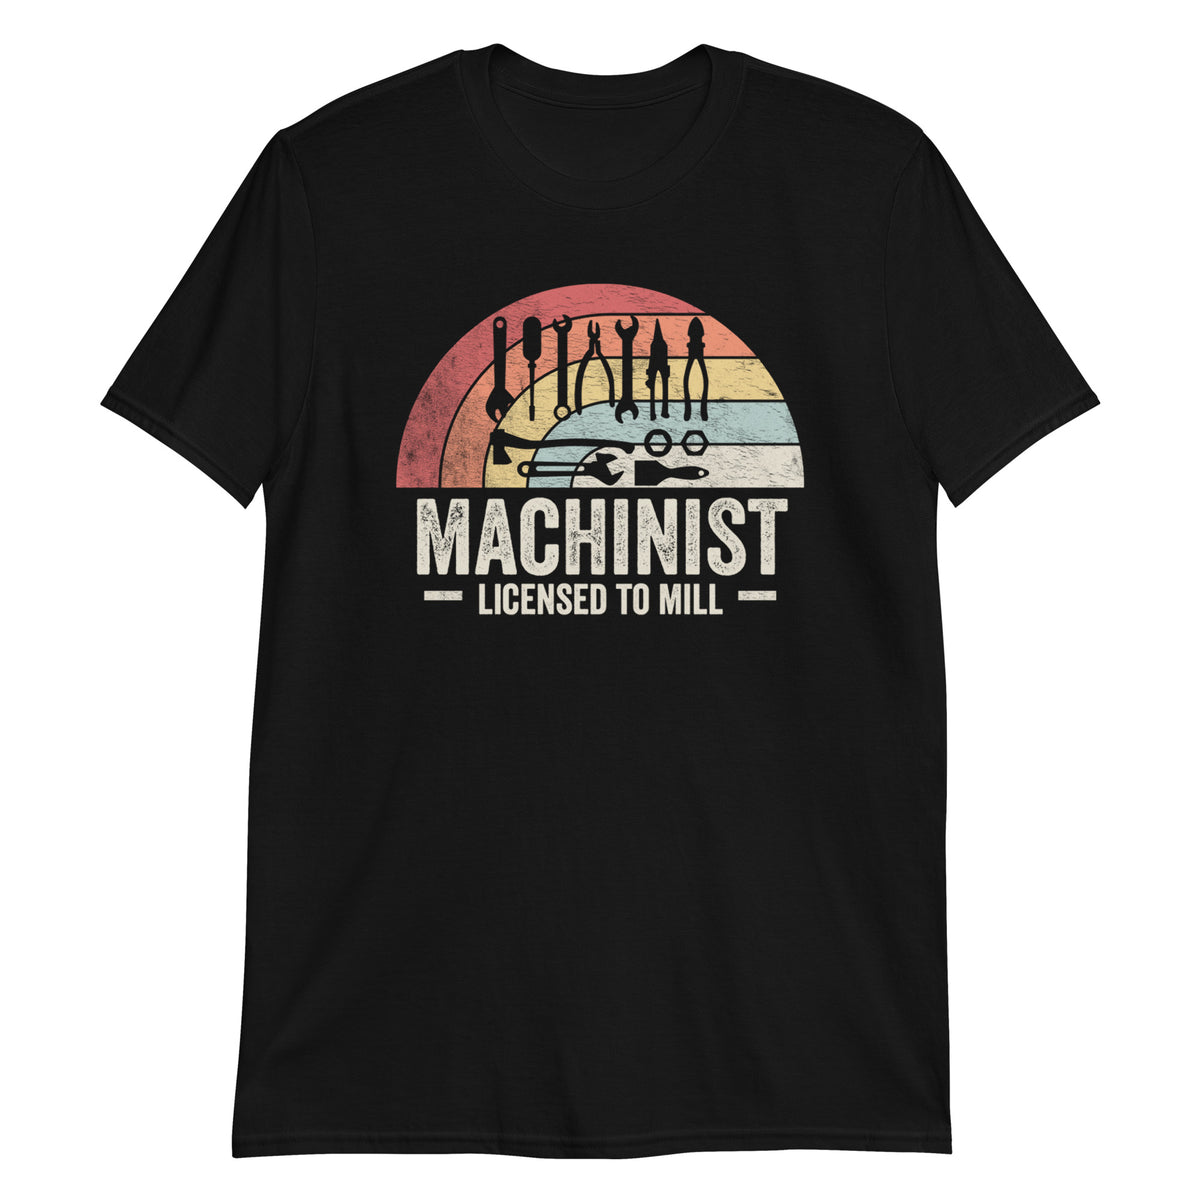 Machinist Licensed to Mill T-Shirt